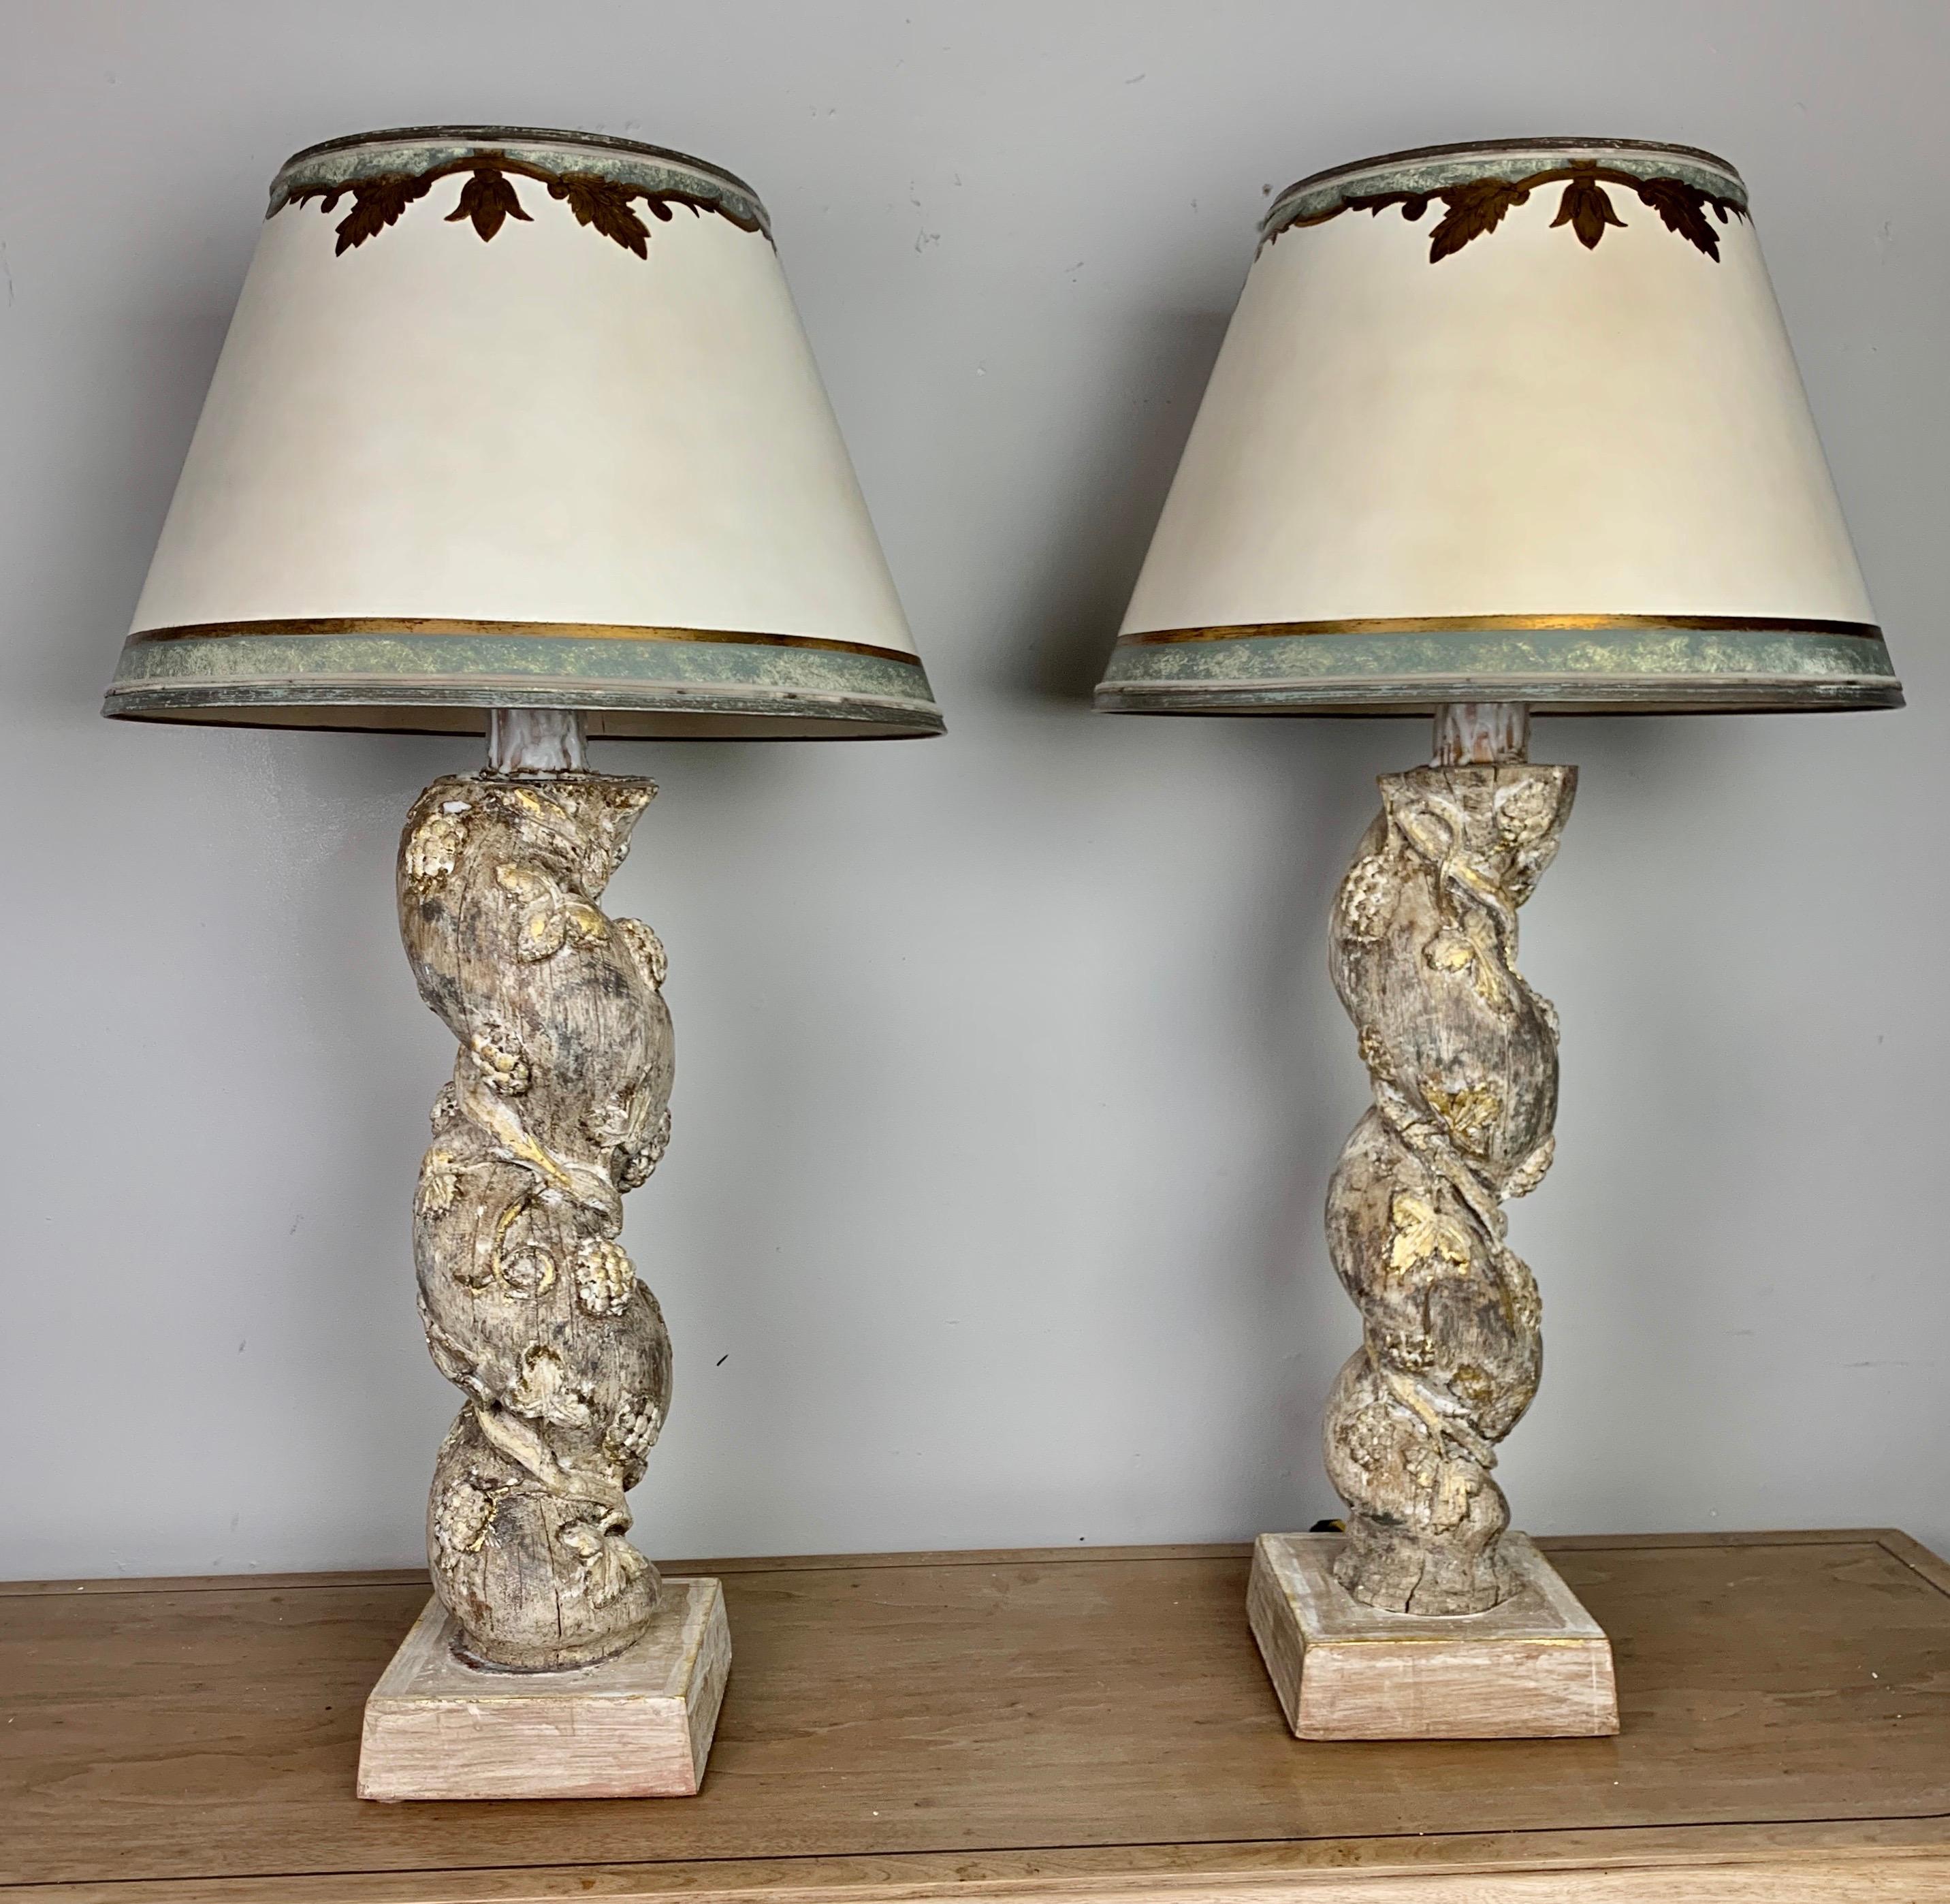 Pair of custom lamps made with a pair of 19th century twisted carved columns wired into lamps. The columns are carved with garlands of fruit and flowers. The lamps are crowned with hand painted parchment shades that are hand painted to coordinate